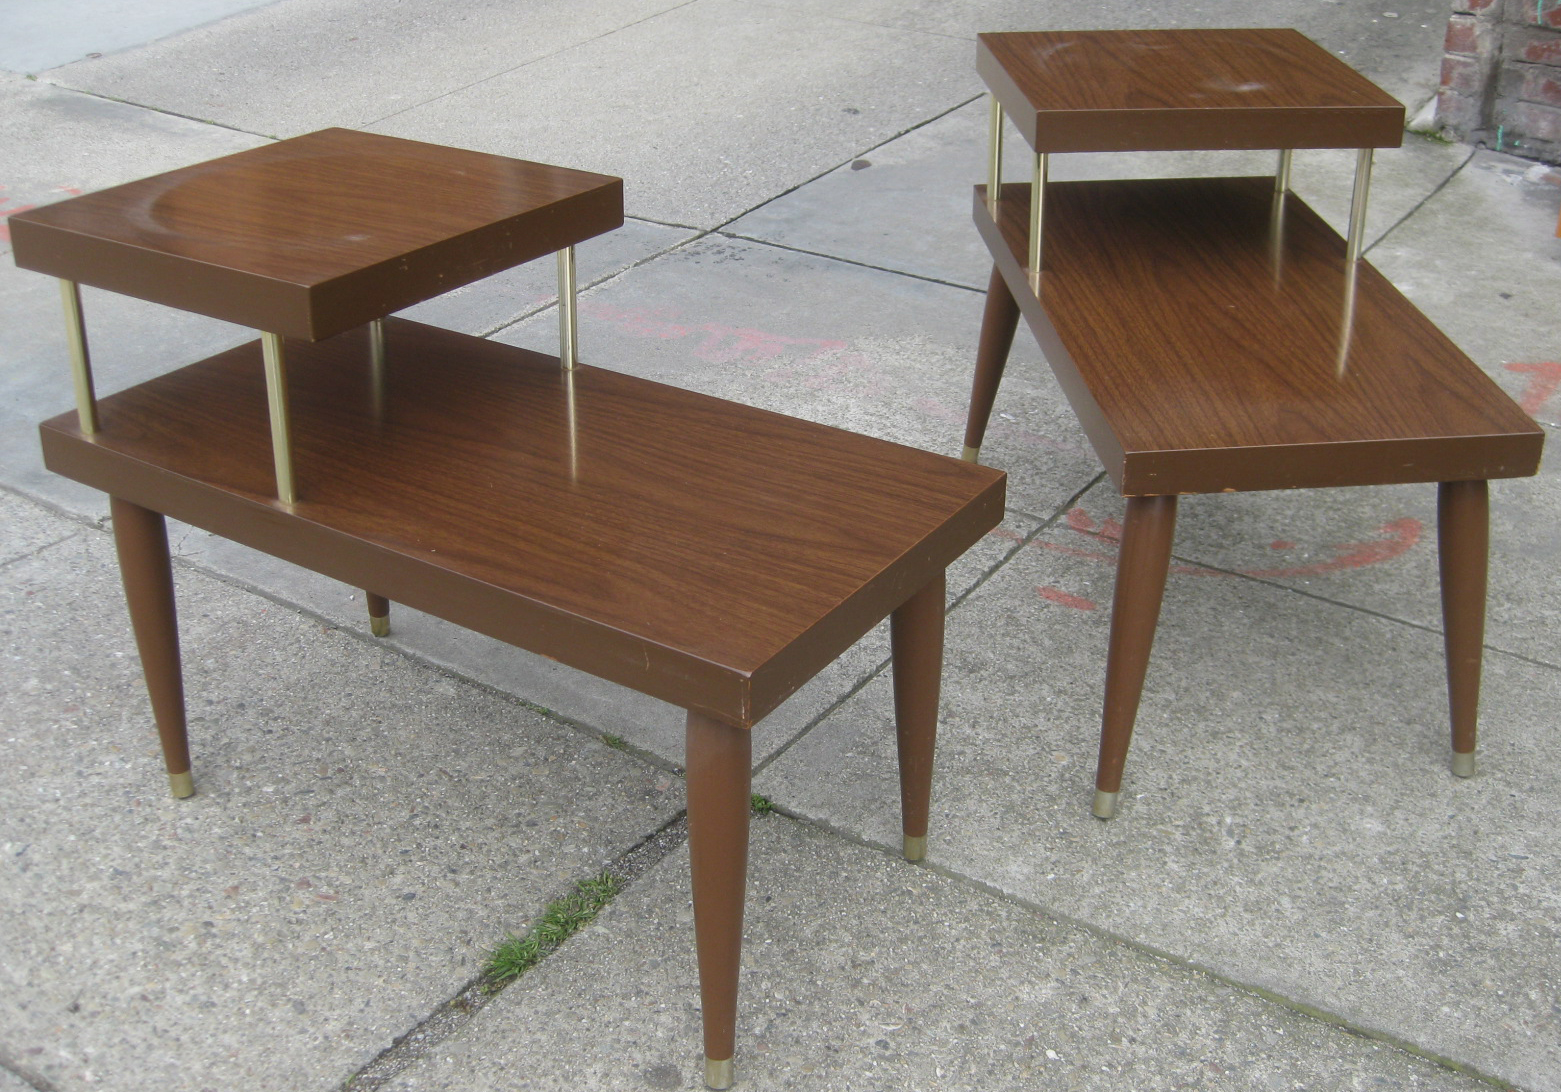 UHURU FURNITURE & COLLECTIBLES: SOLD - Mid-Century Side Tables - $35